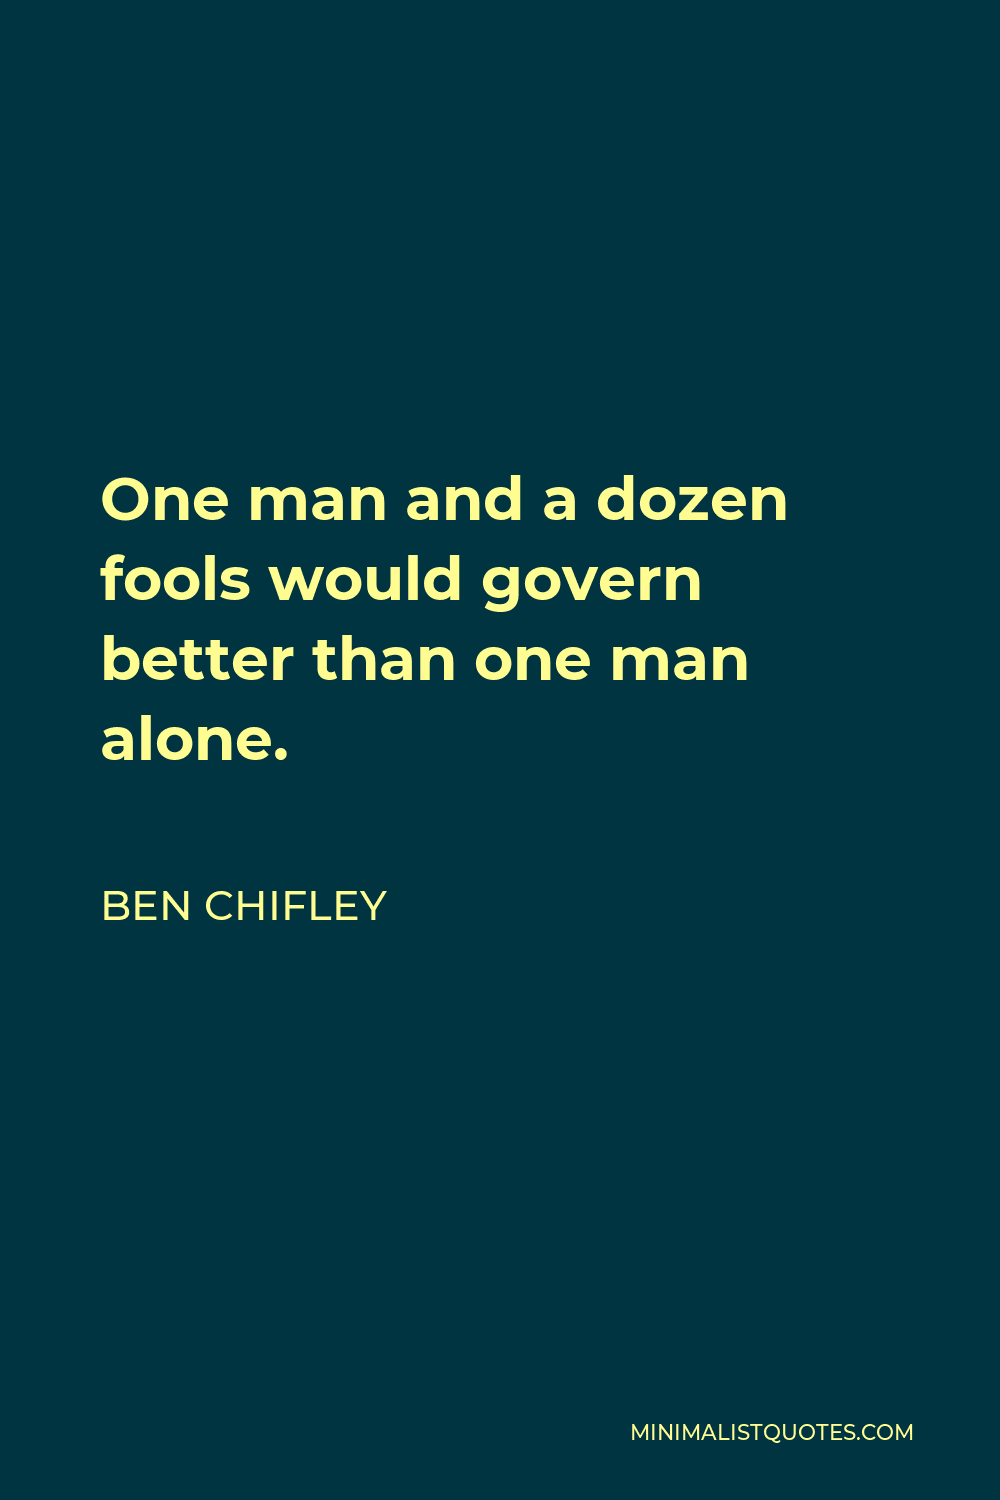 Ben Chifley Quote - One man and a dozen fools would govern better than one man alone.